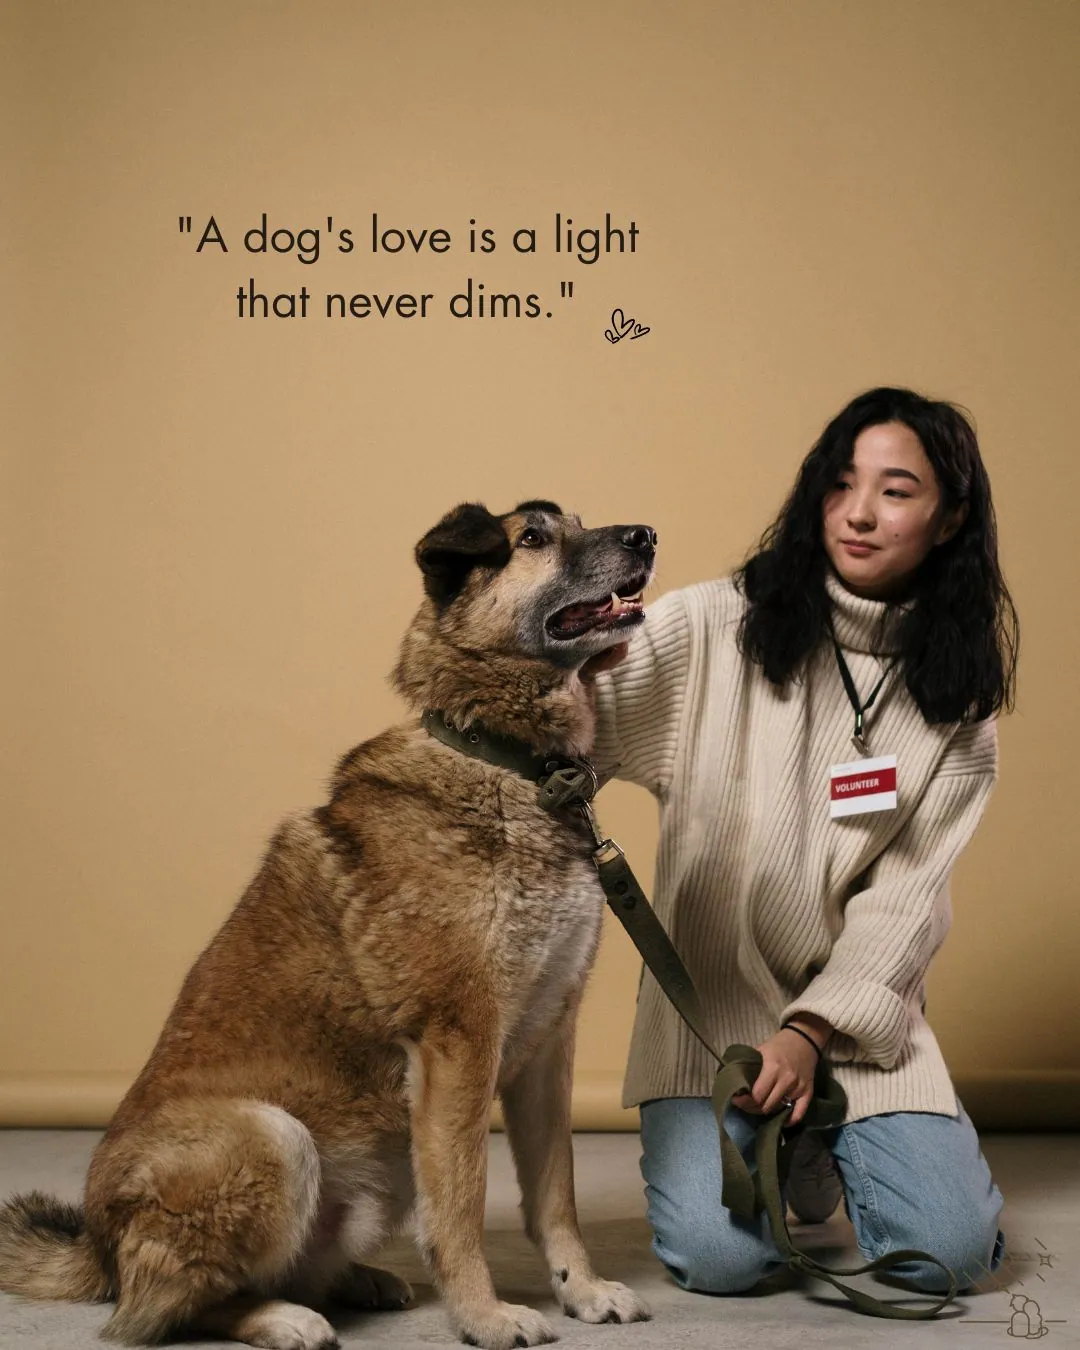 Pet Loss Quotes for Dog Image (2)